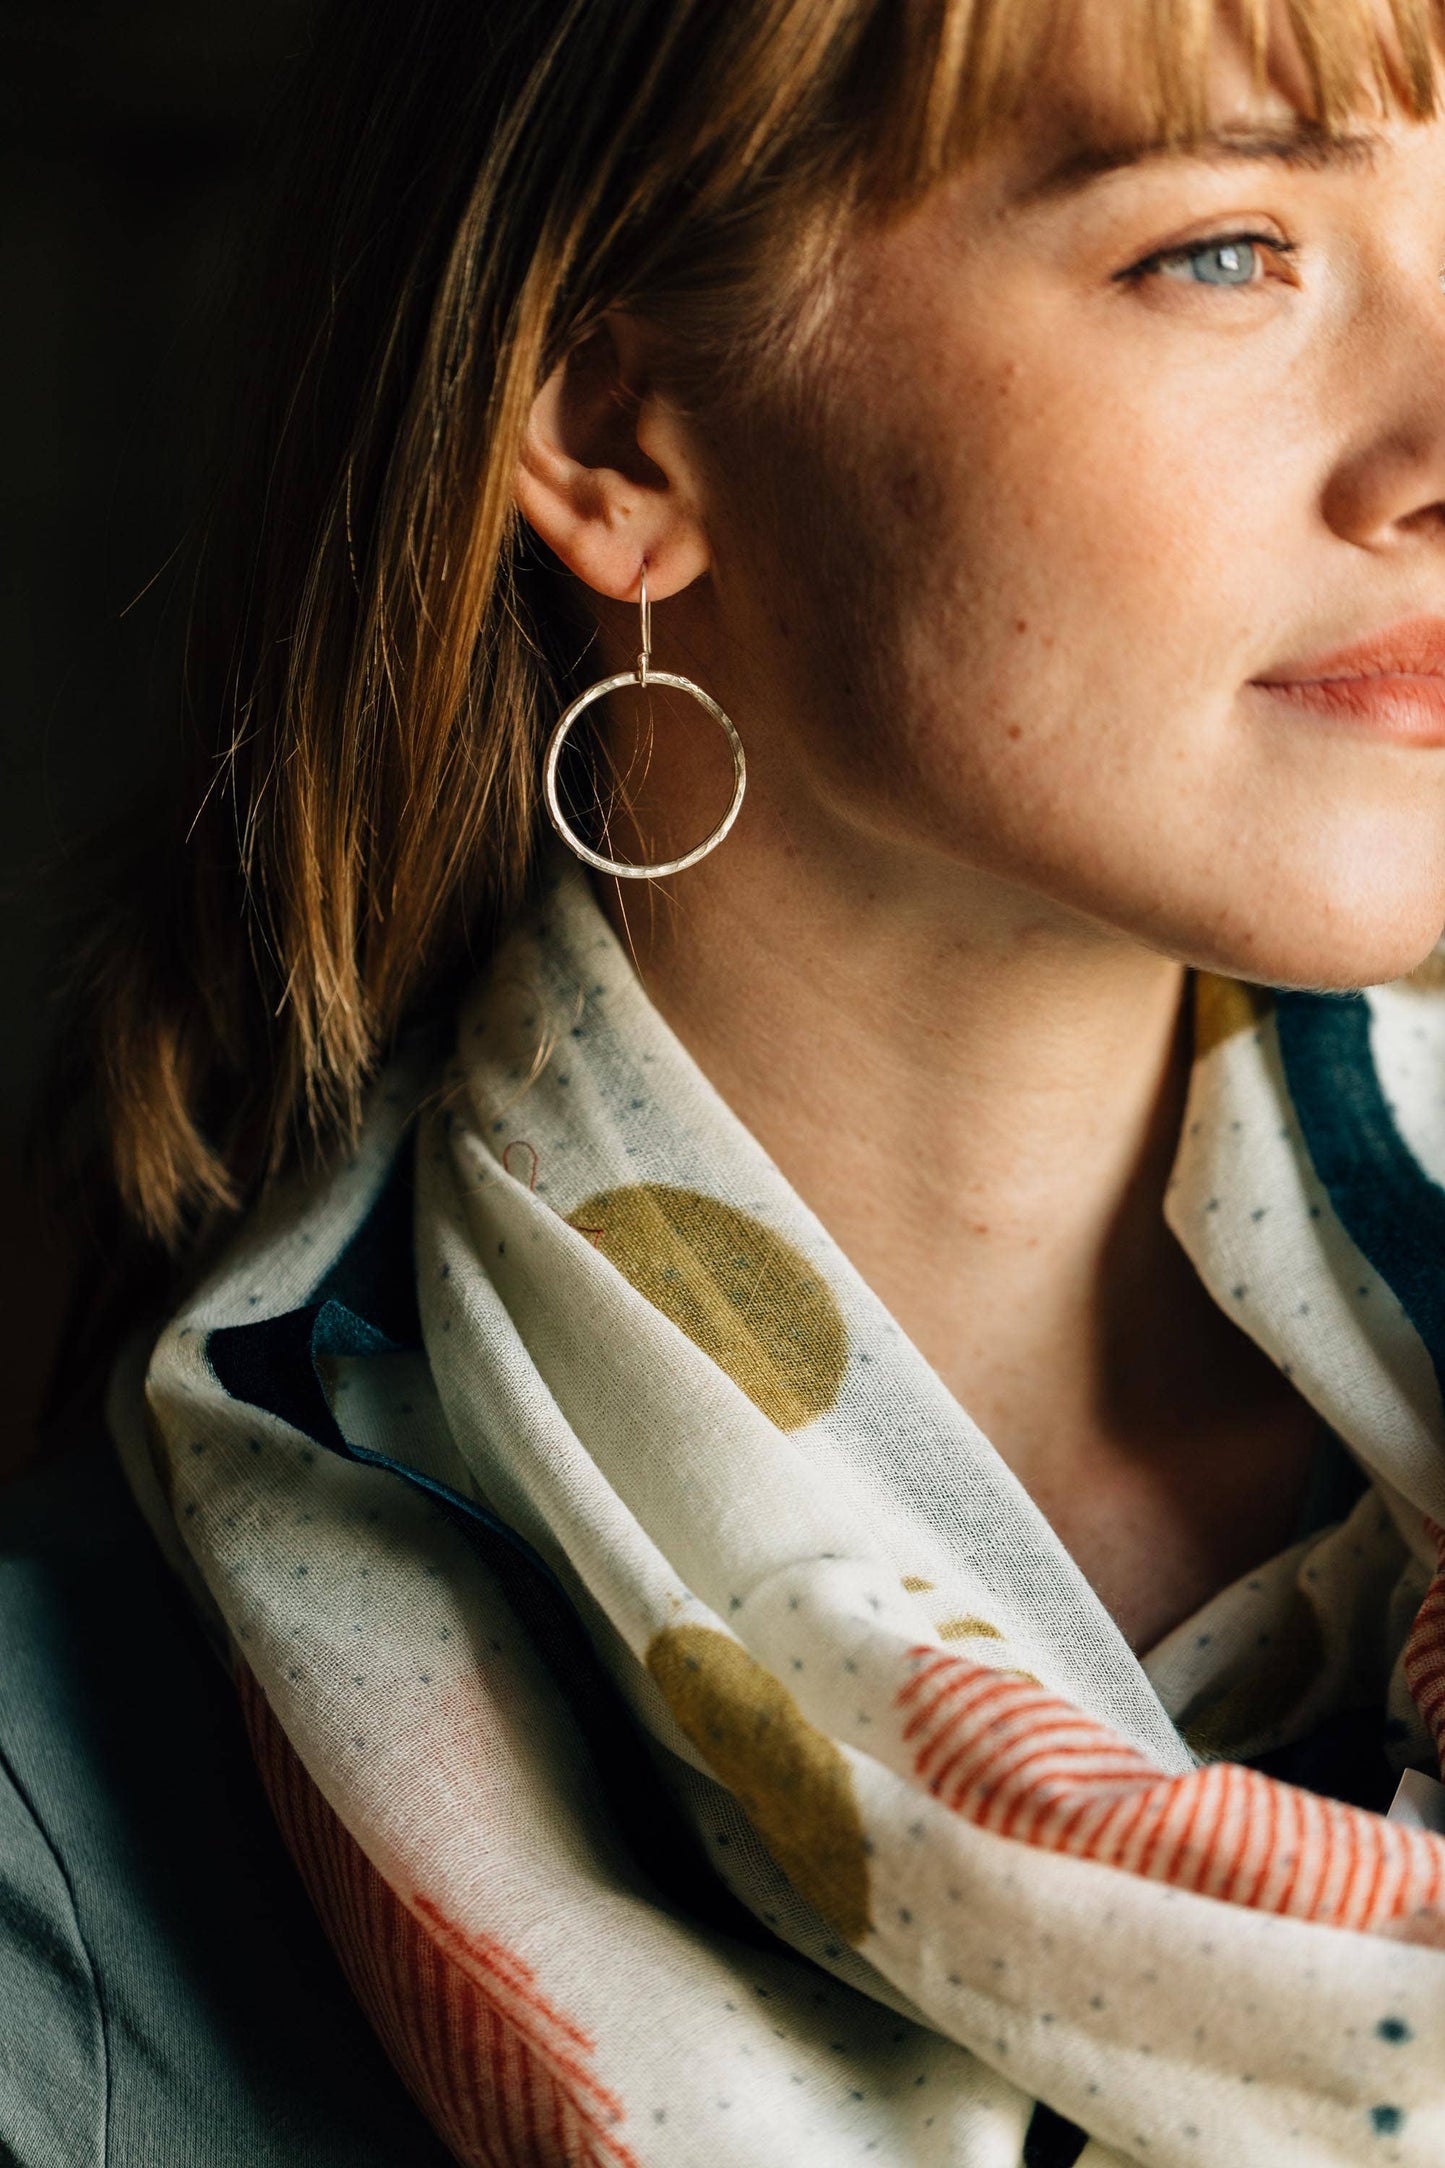 Ten Thousand Villages - Hammered Ring Earrings